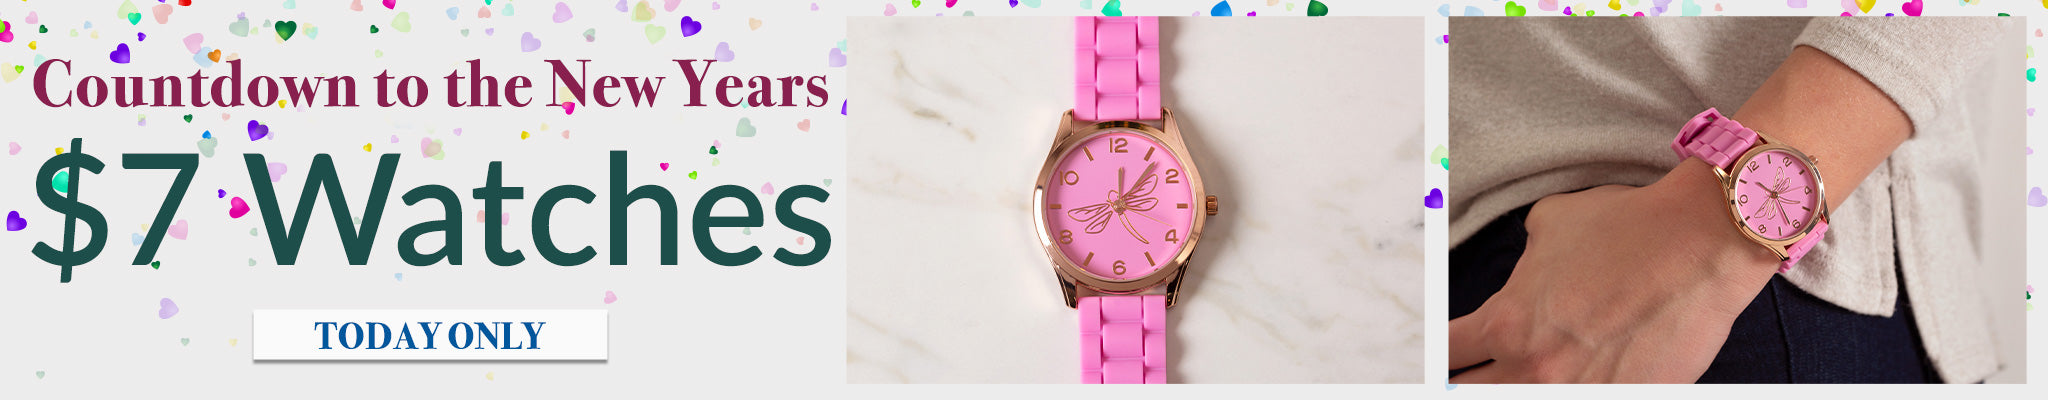 Countdown to the New Year! | $6 Watches | Today Only!